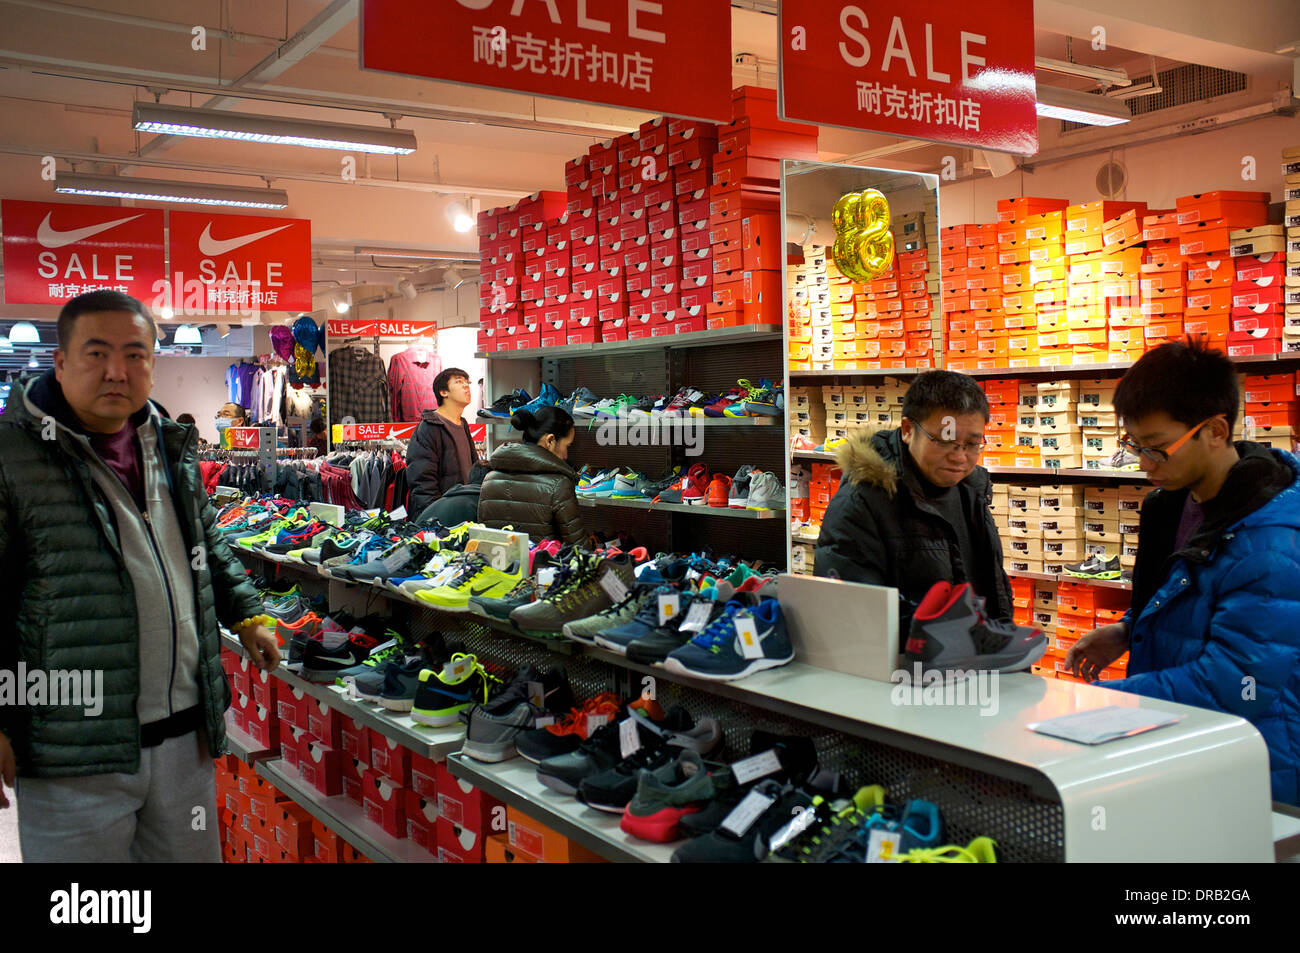 A Nike store in Beijing, China. 2014 Stock Photo - Alamy